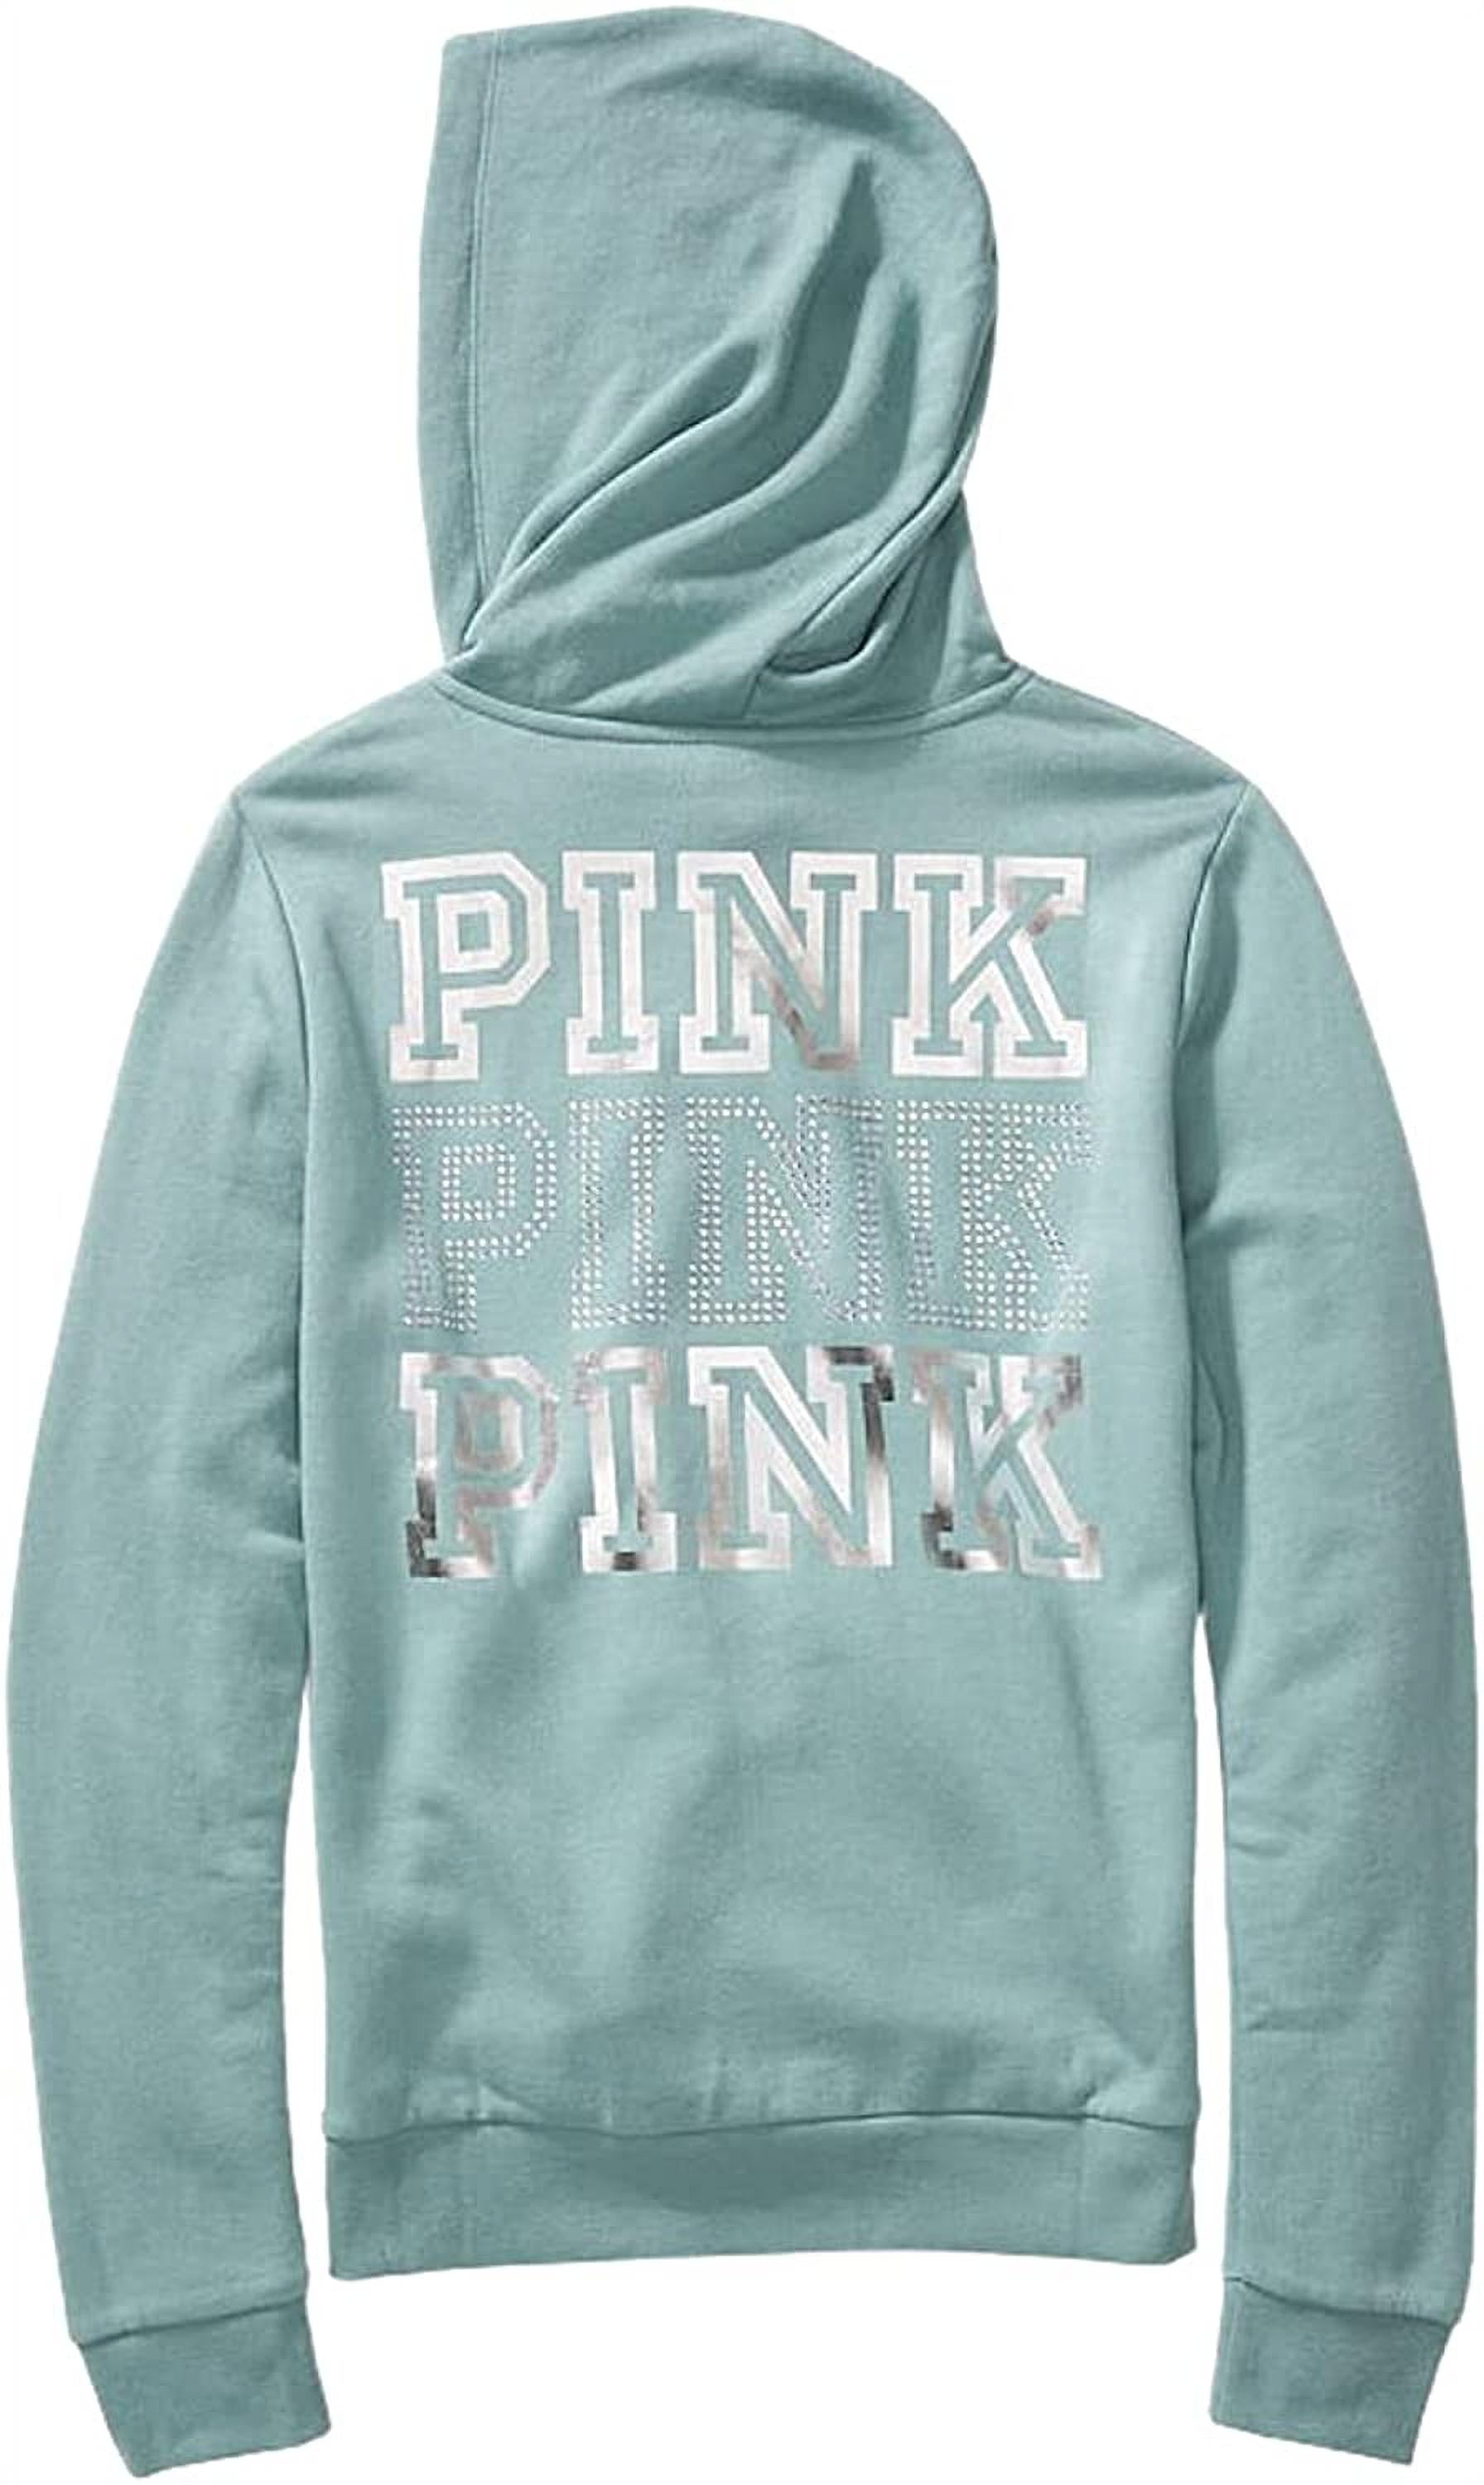 Victoria's Secret PINK Bling Perfect Full Zip Hoodie Sweater Sz Large NWT 